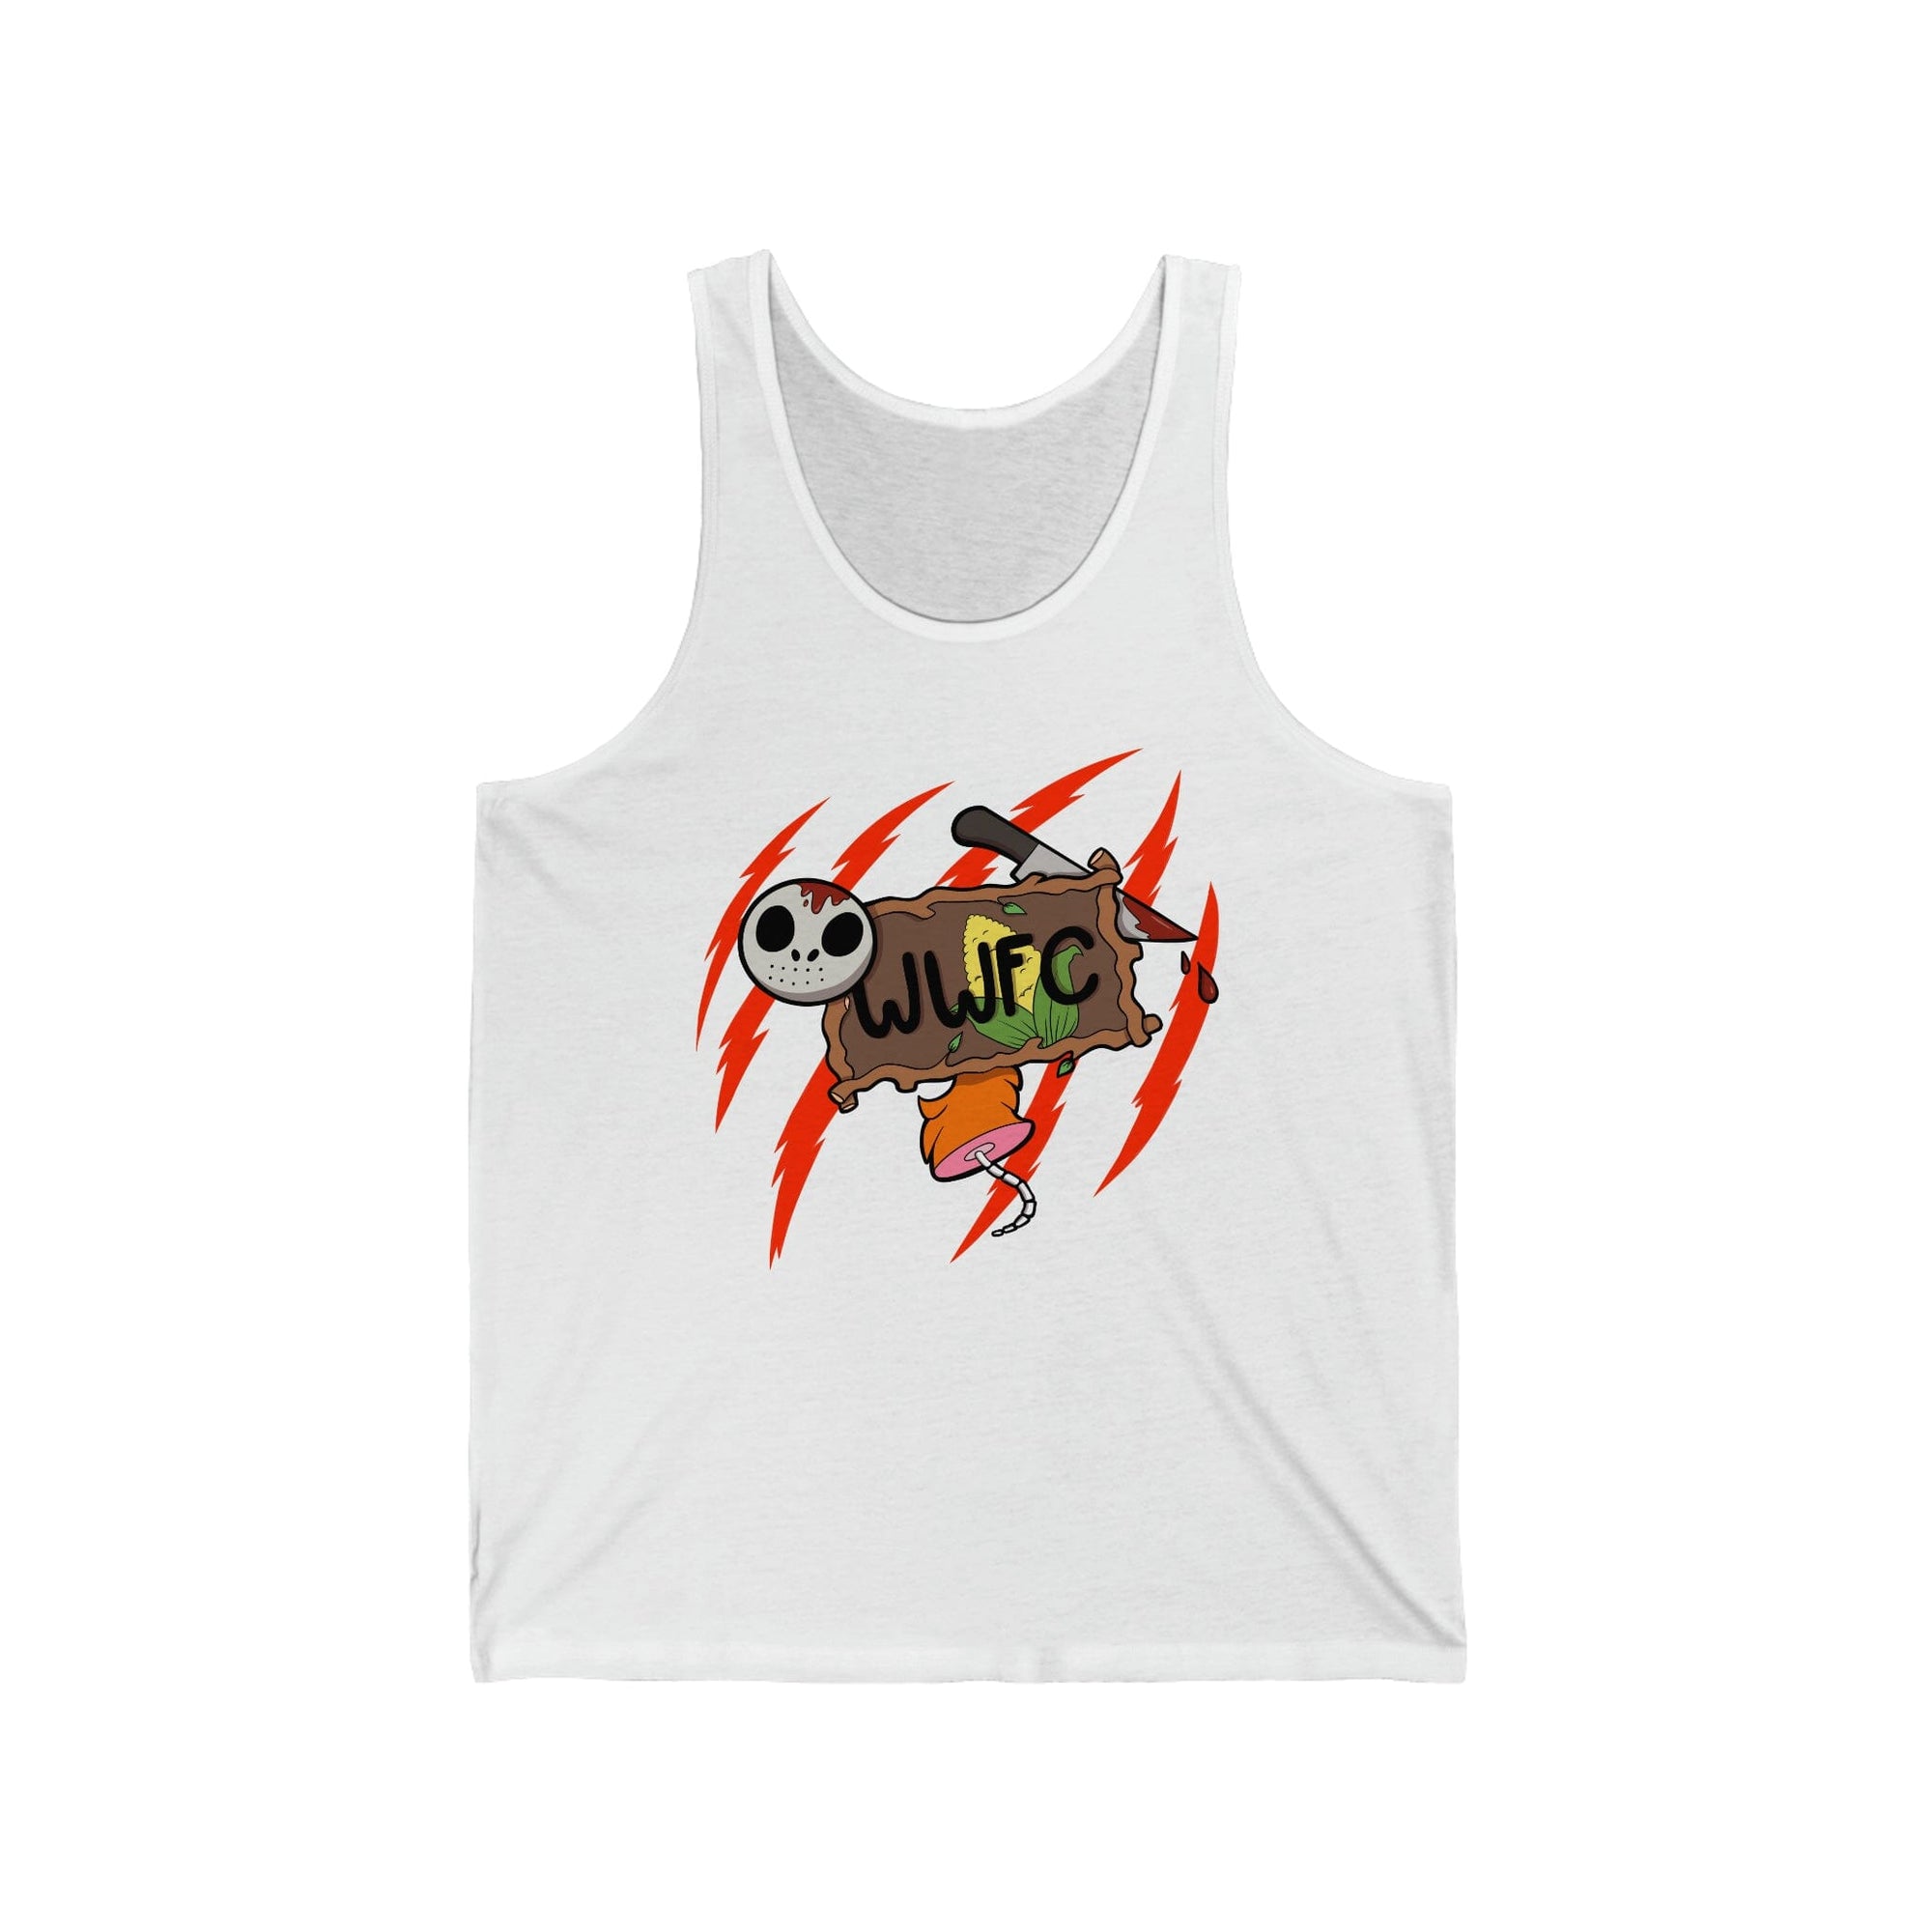 WWFC 2024 : Furries of the Corn - Tank Top Tank Top AFLT-Hund The Hound White XS 